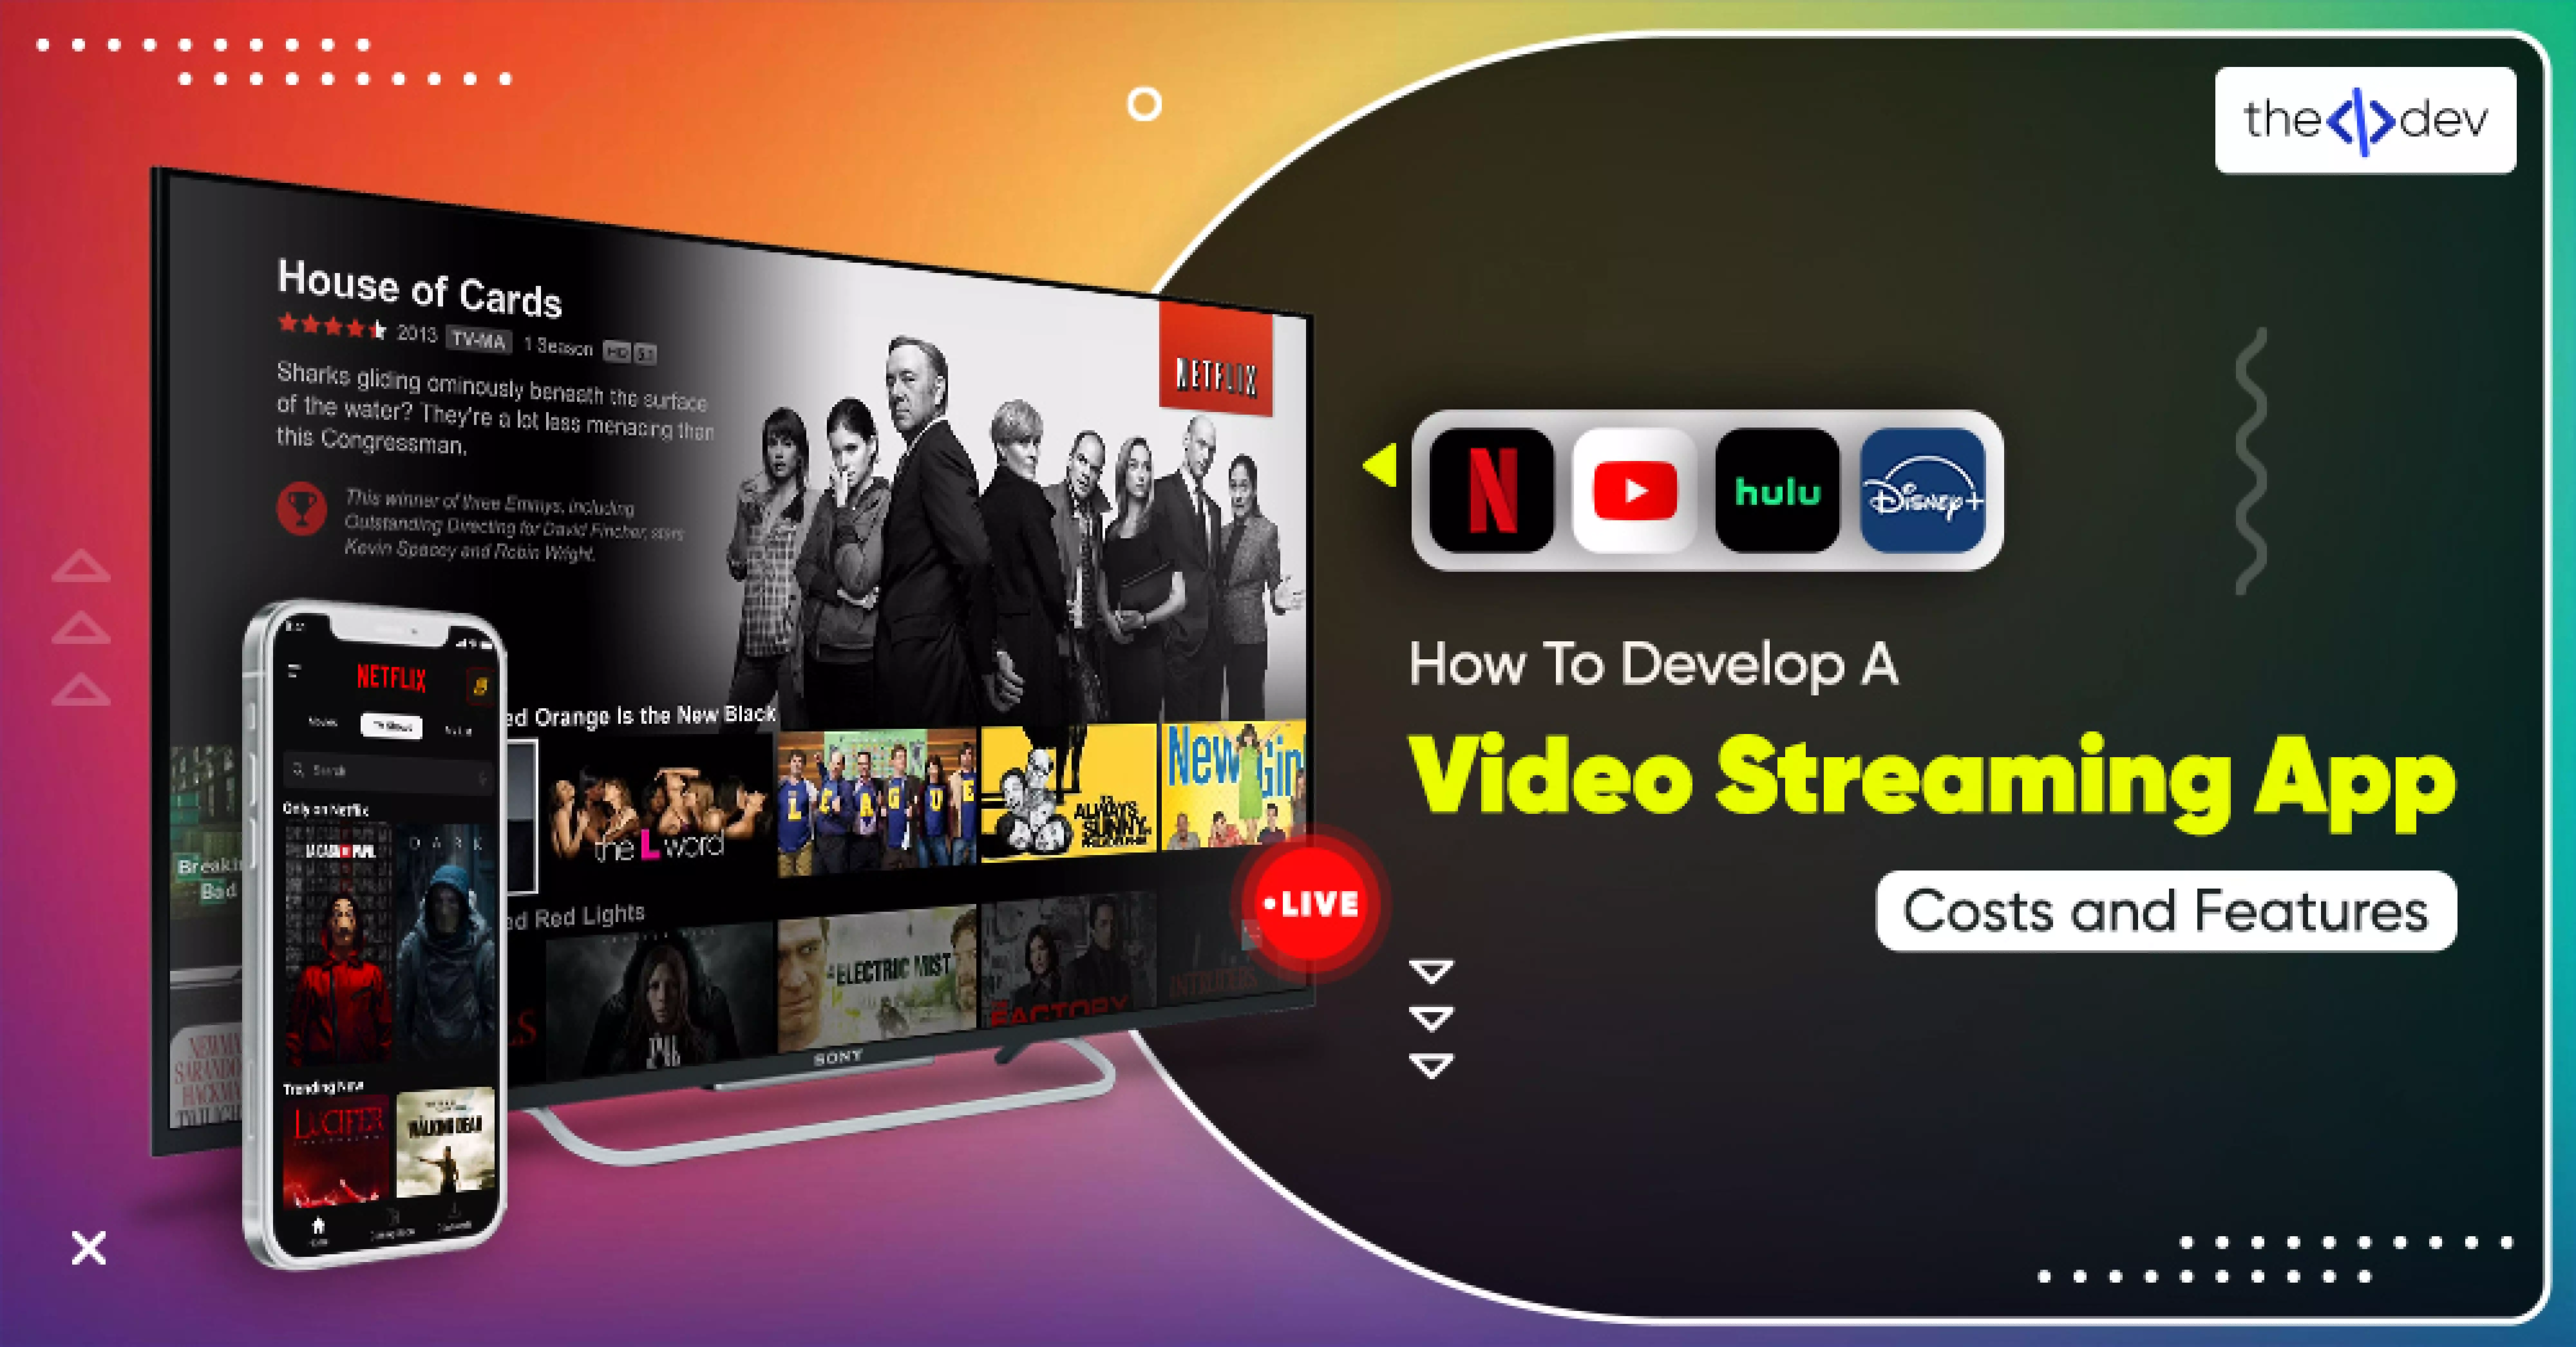 How To Develop A Video Streaming App -Costs and Features